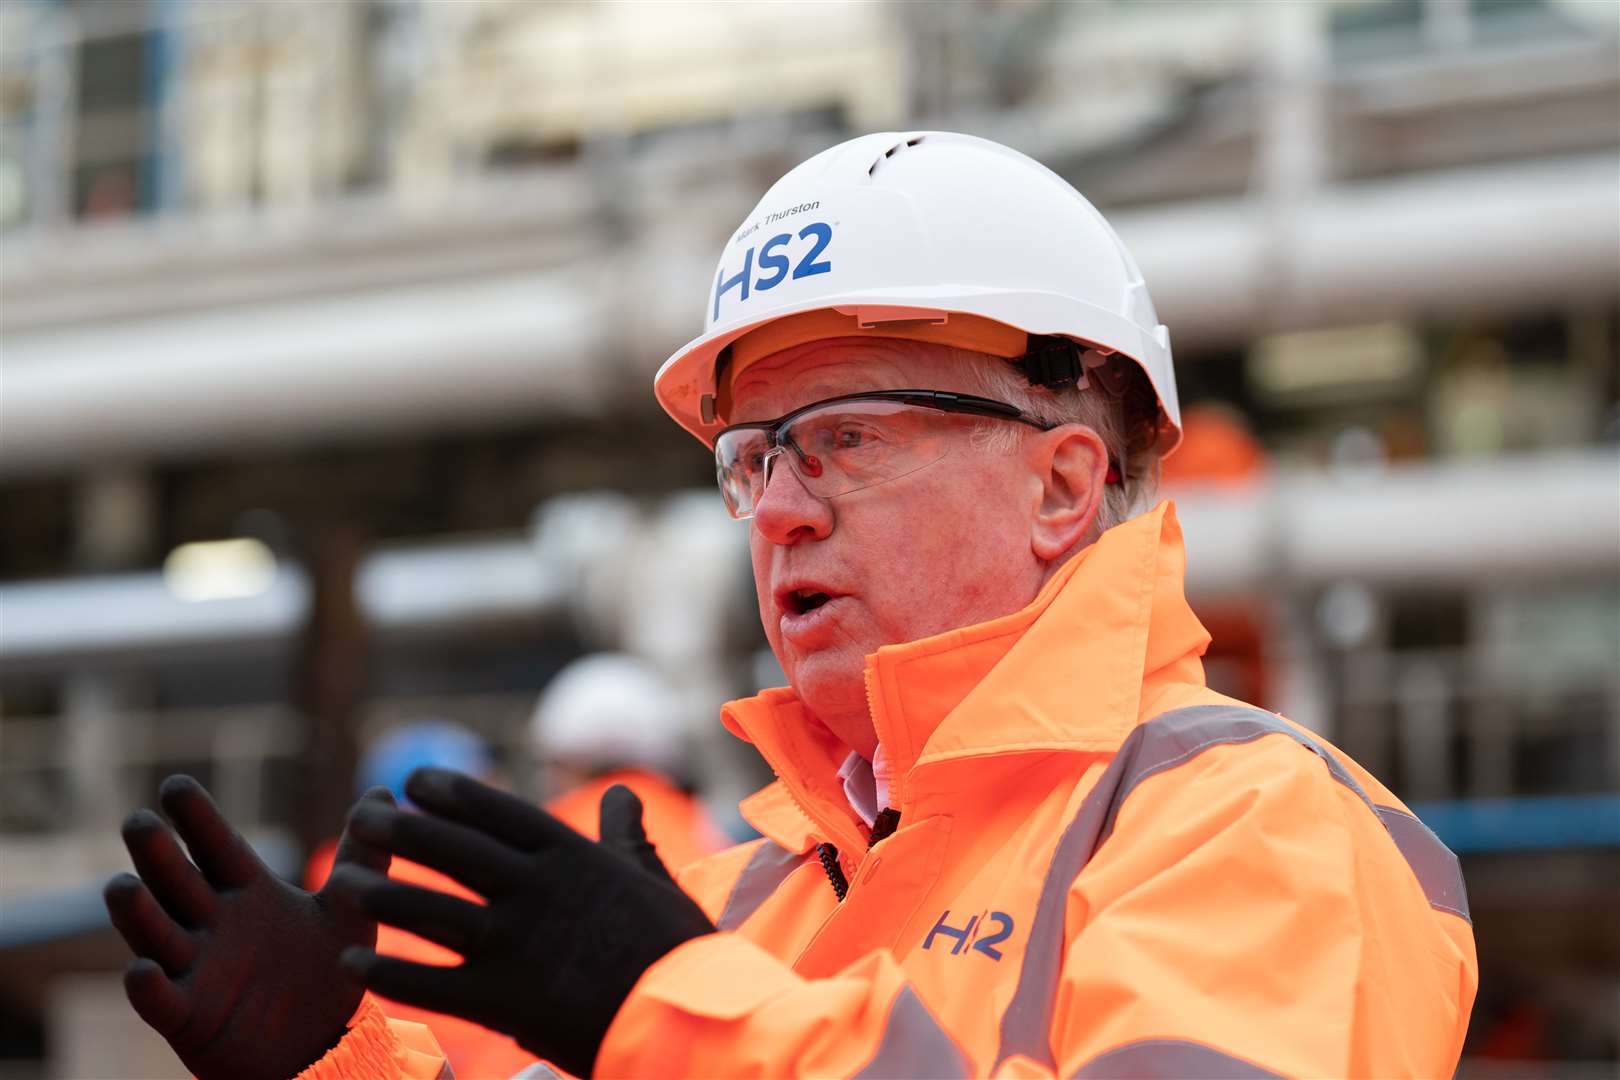 HS2 boss Mark Thurston said the project is currently ‘delivering jobs for almost 30,000 people’ (Joe Giddens/PA)